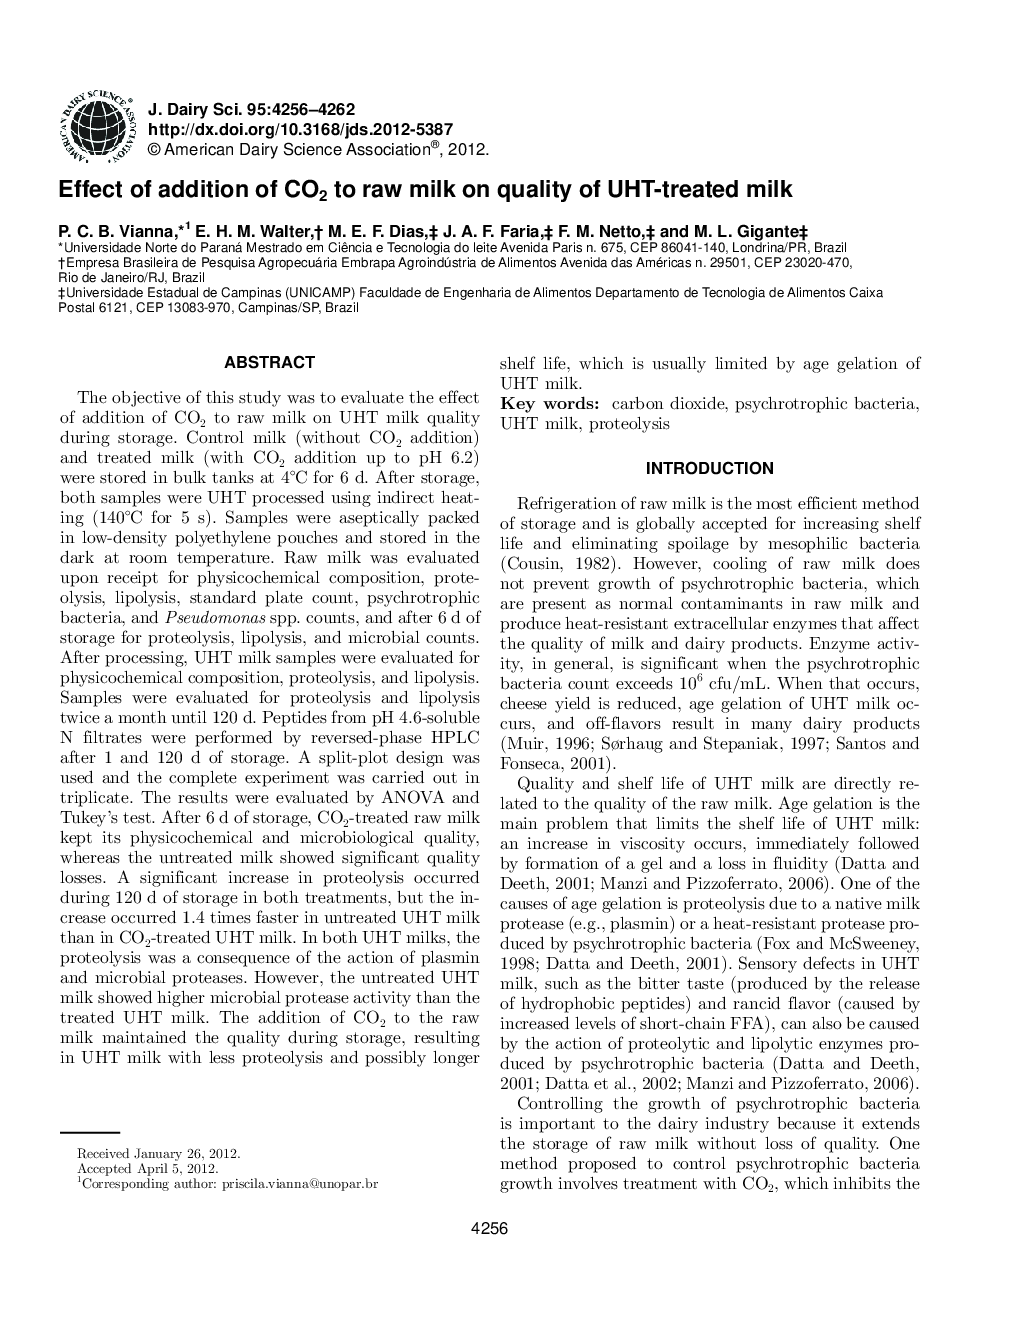 Effect of addition of CO2 to raw milk on quality of UHT-treated milk